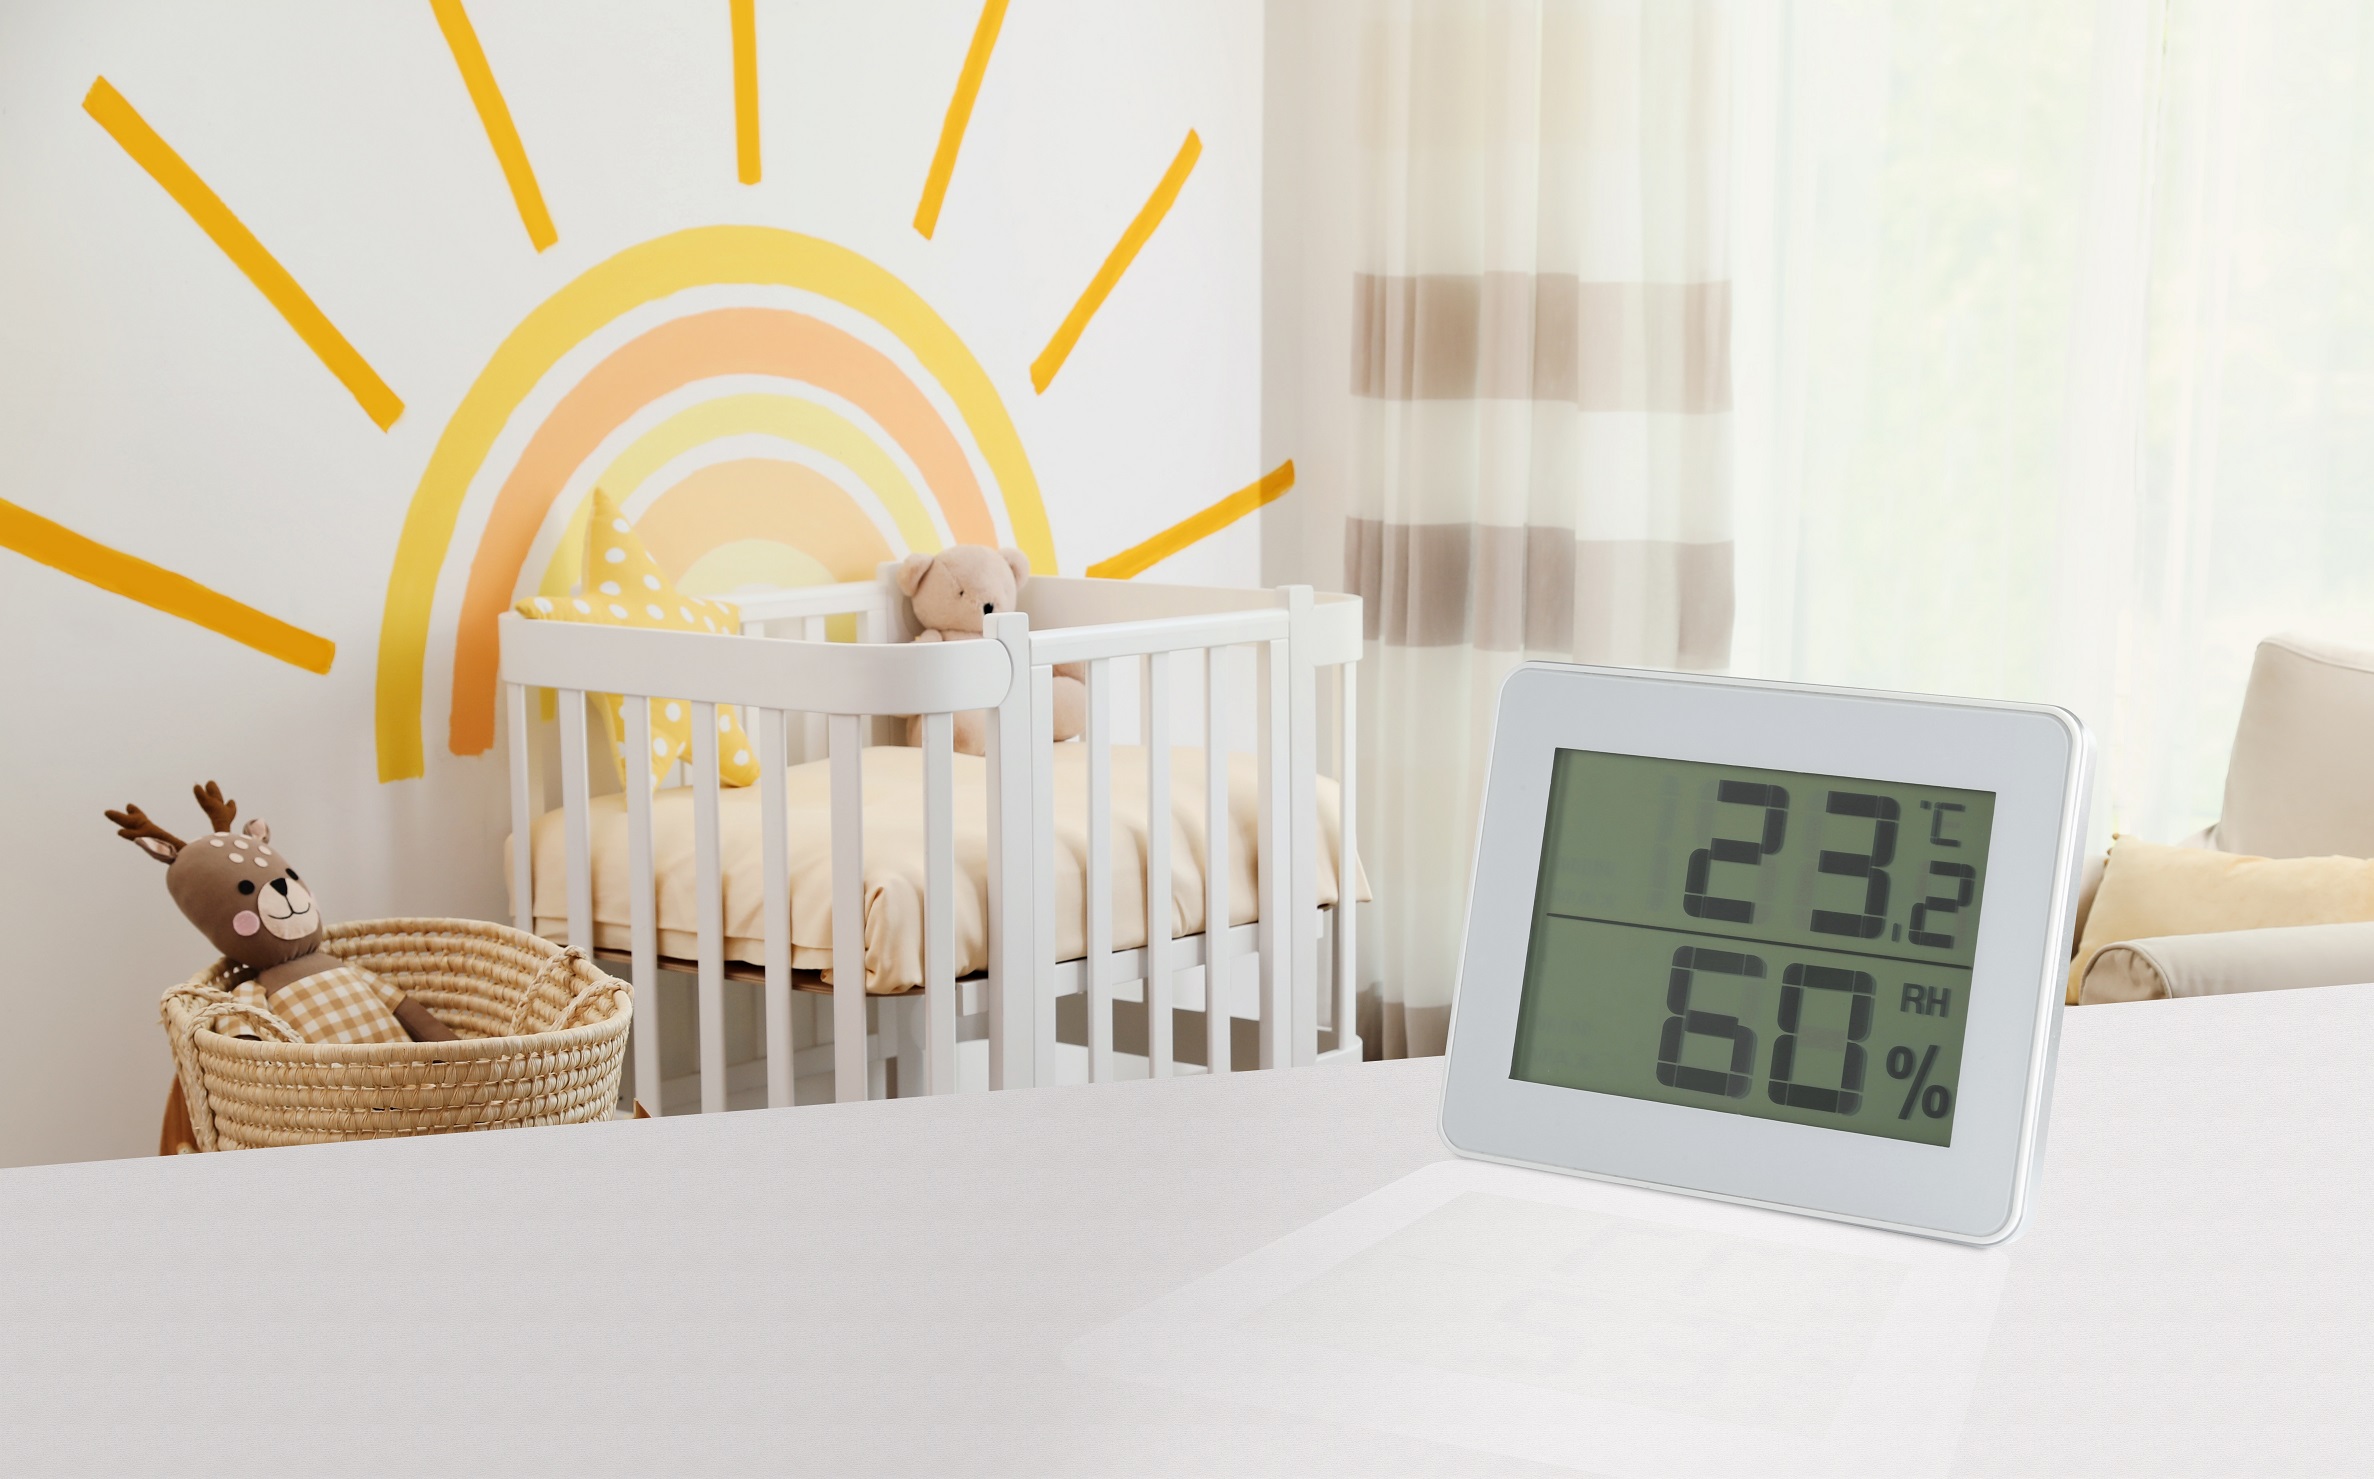 Children's room with temperature and humidity sensor on the table